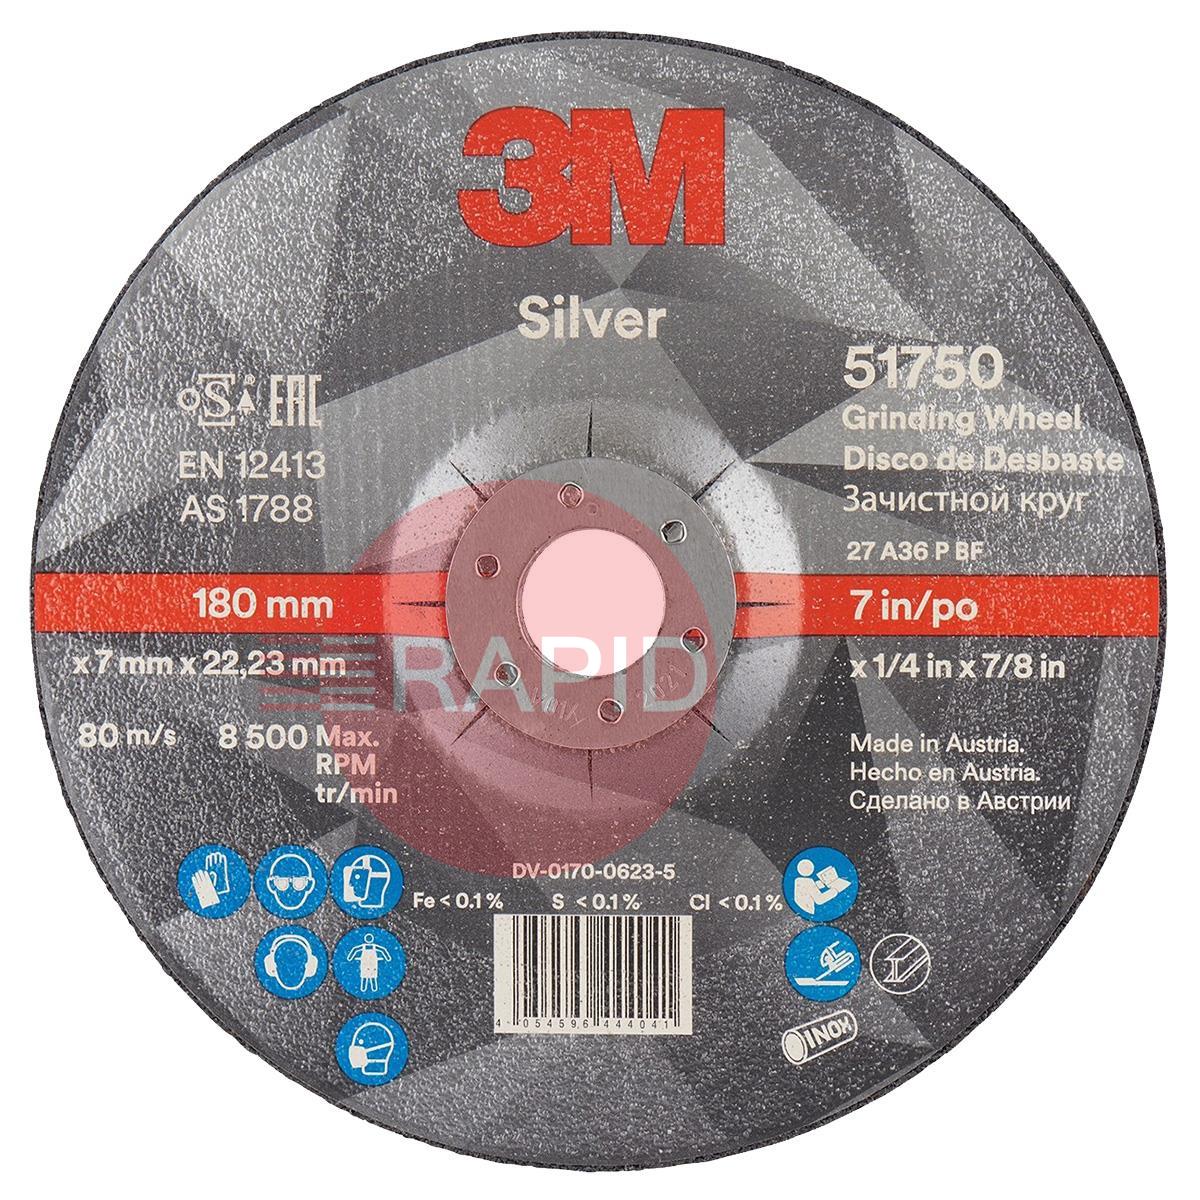 3M-51750  3M Silver Depressed Centre Grinding Wheel 178mm x 7mm x 22.23mm (Box of 10)